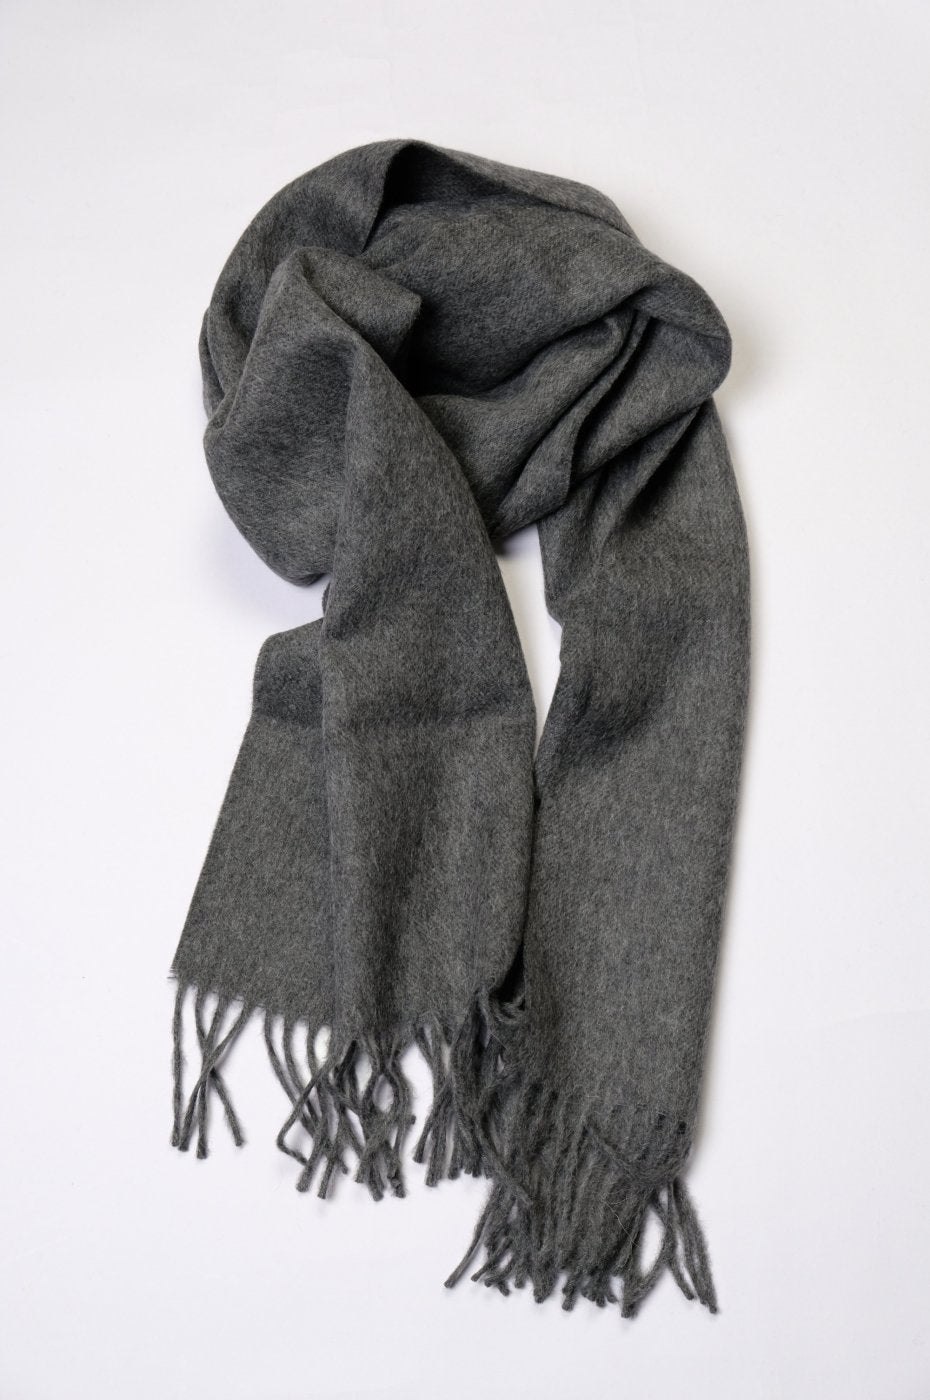 THE INOUE BROTHERS... "BRUSHED SCARF / GRAY"